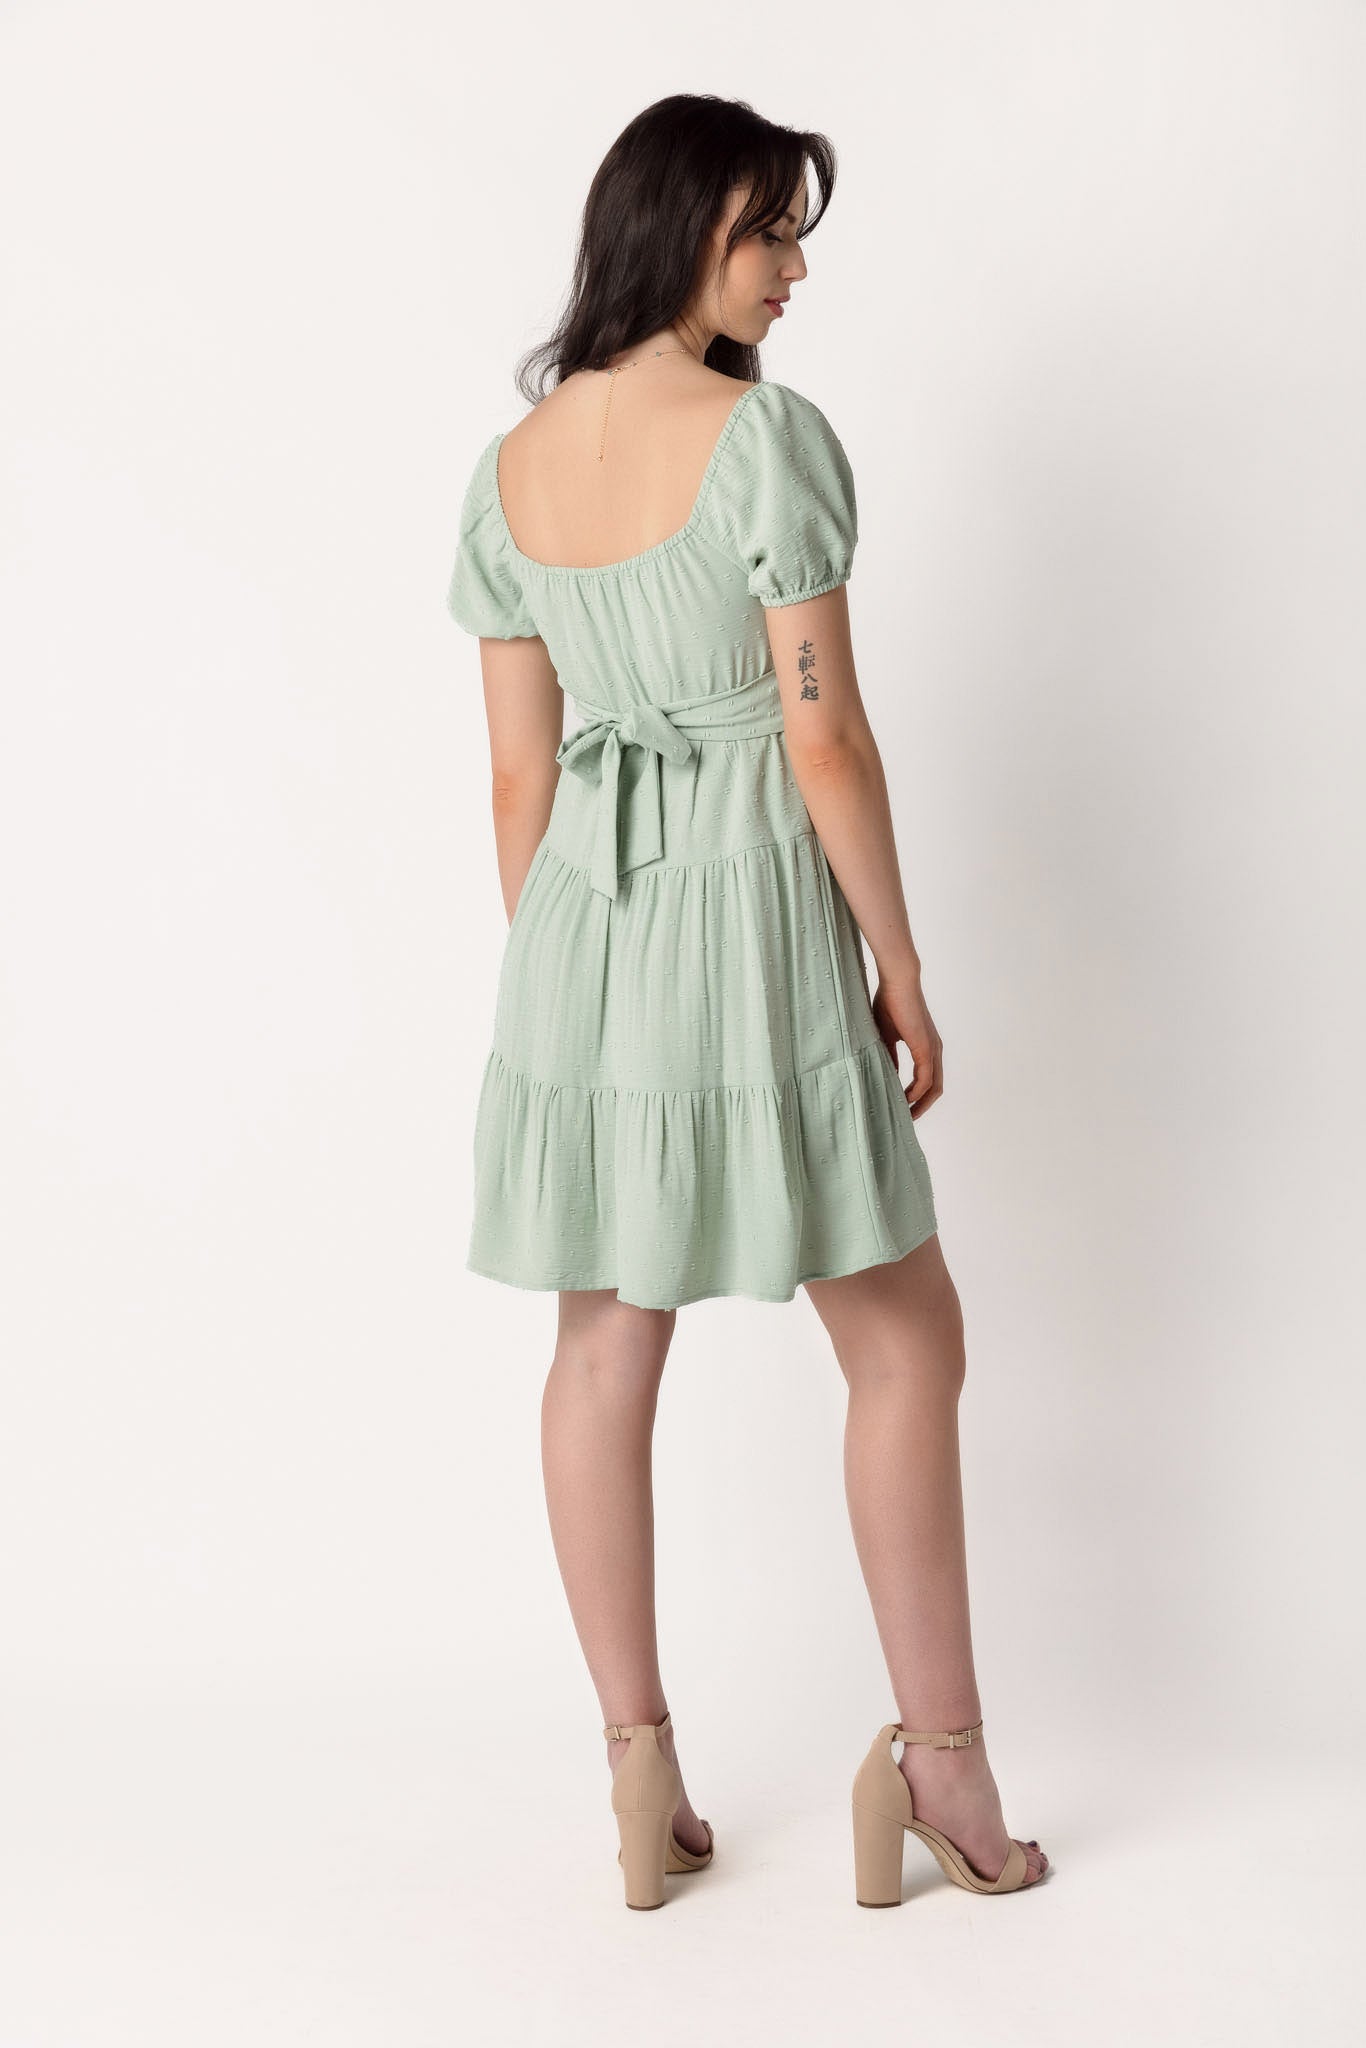 Airflow Swiss Dot Peasant Dress with Tie-Back